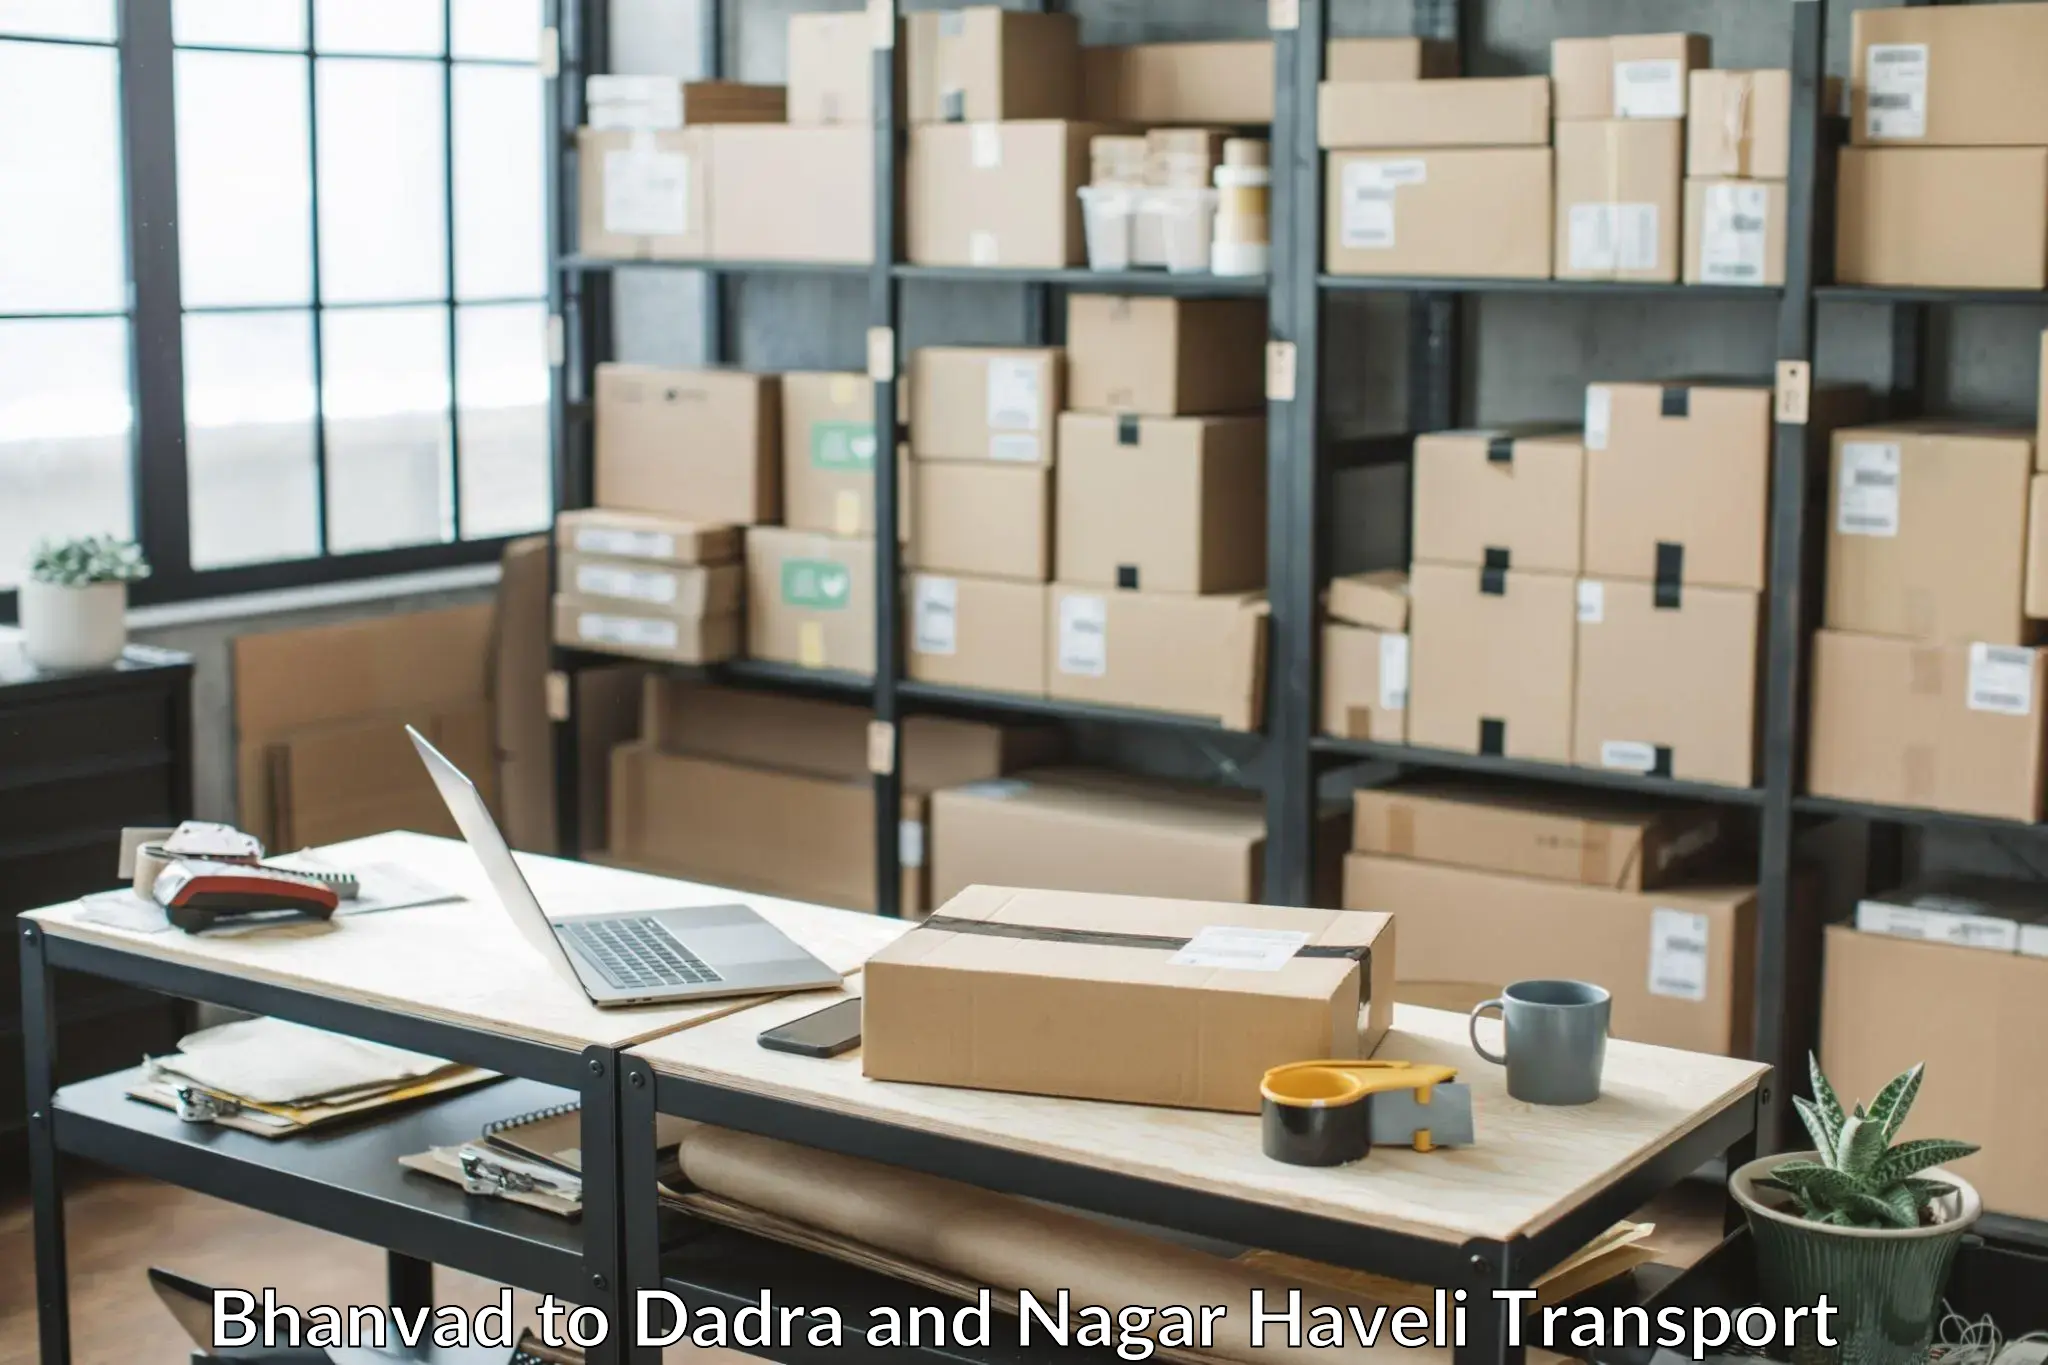 Parcel transport services in Bhanvad to Dadra and Nagar Haveli